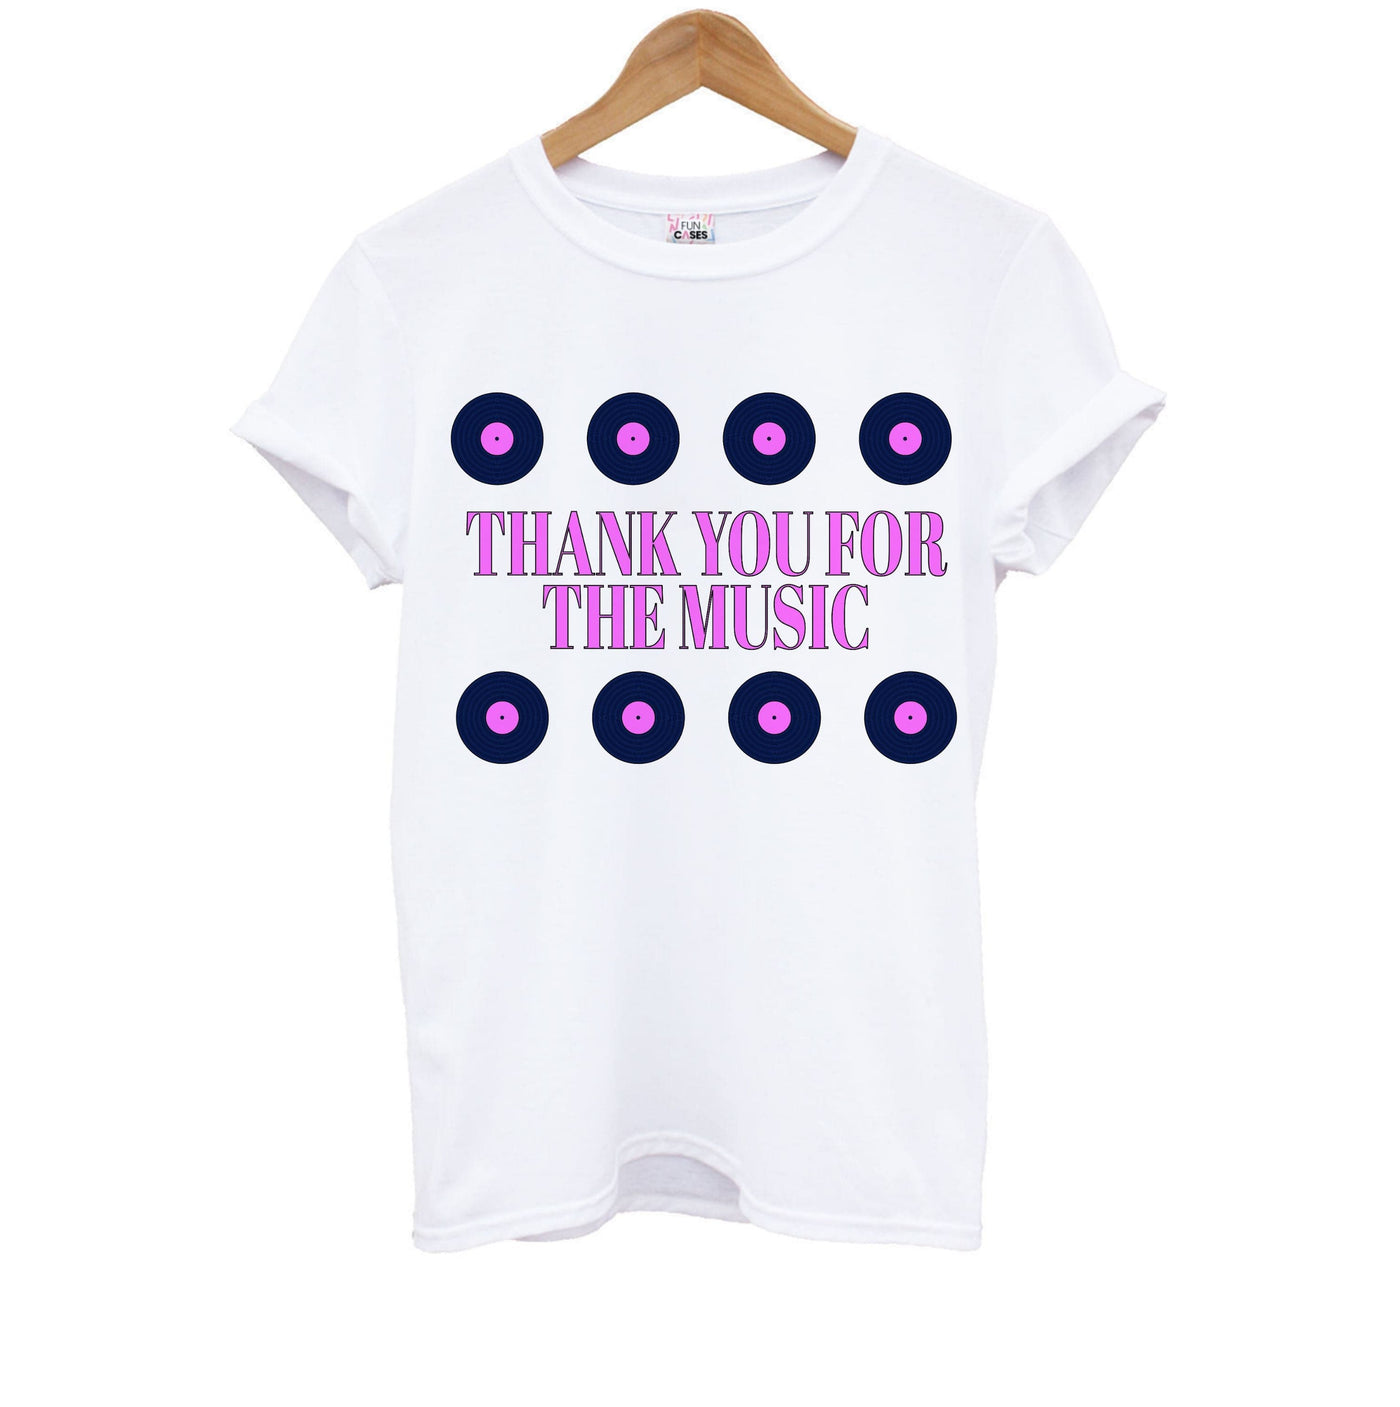 Thank You For The Music - Mamma Mia Kids T-Shirt